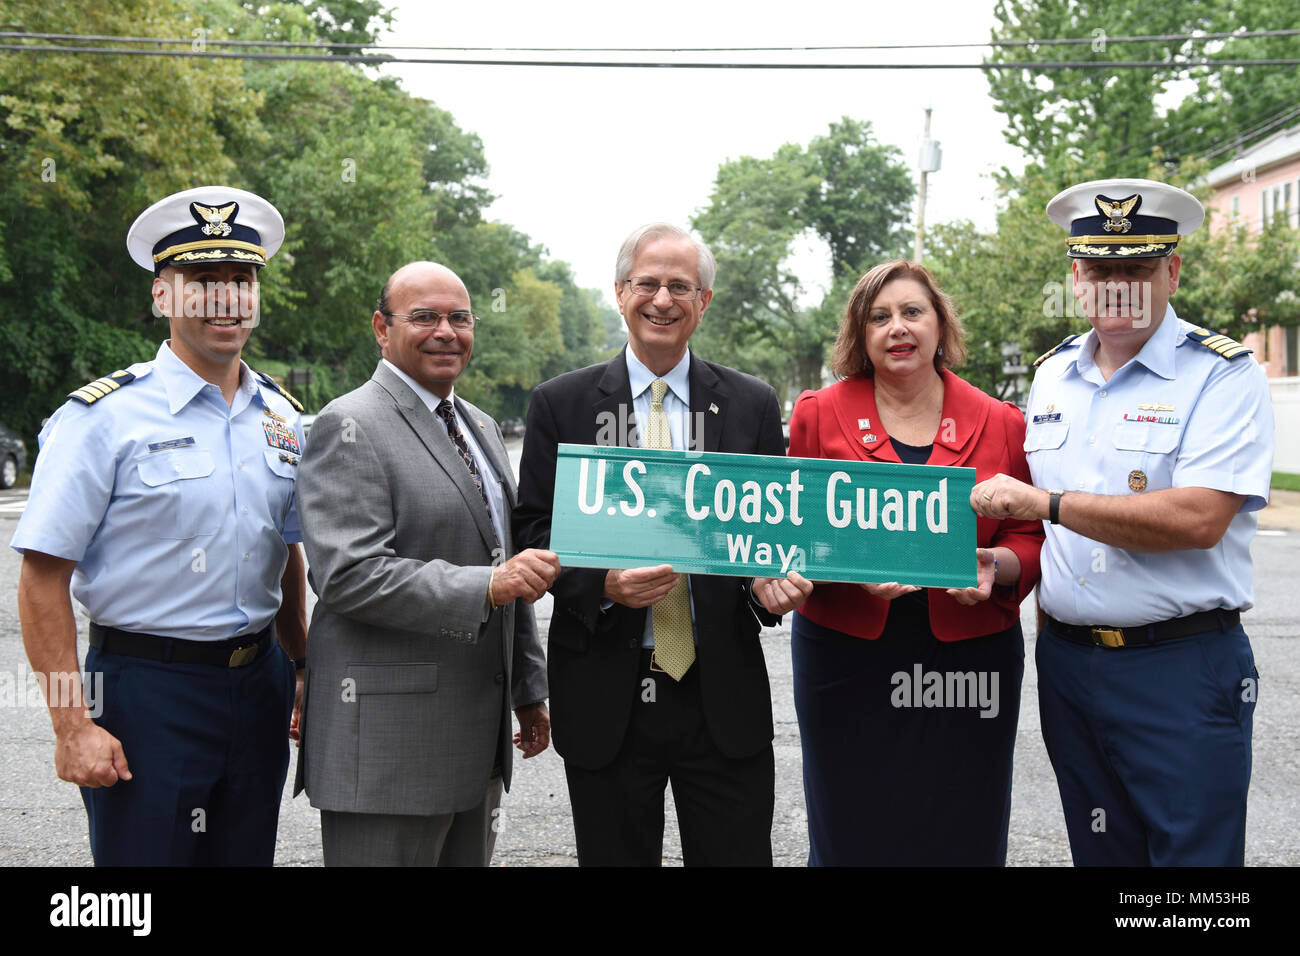 NEW YORK – Capt. Jason Tama, deputy commander Sector New York, stands with Frank Santarpia, senior advisor to the borough president, Ed Burke, deputy borough president, Linda Dianto, executive director National Lighthouse Museum, and Capt. Michael Day, commander Sector New York, as they hold a new street sign to be installed on Staten Island on Sept. 6, 2017. A portion of Bay Street near Fort Wadsworth is now renamed ‘U.S. Coast Guard Way.’ (U.S. Coast Guard photo by Petty Officer 3rd Class Steve Strohmaier) Stock Photo